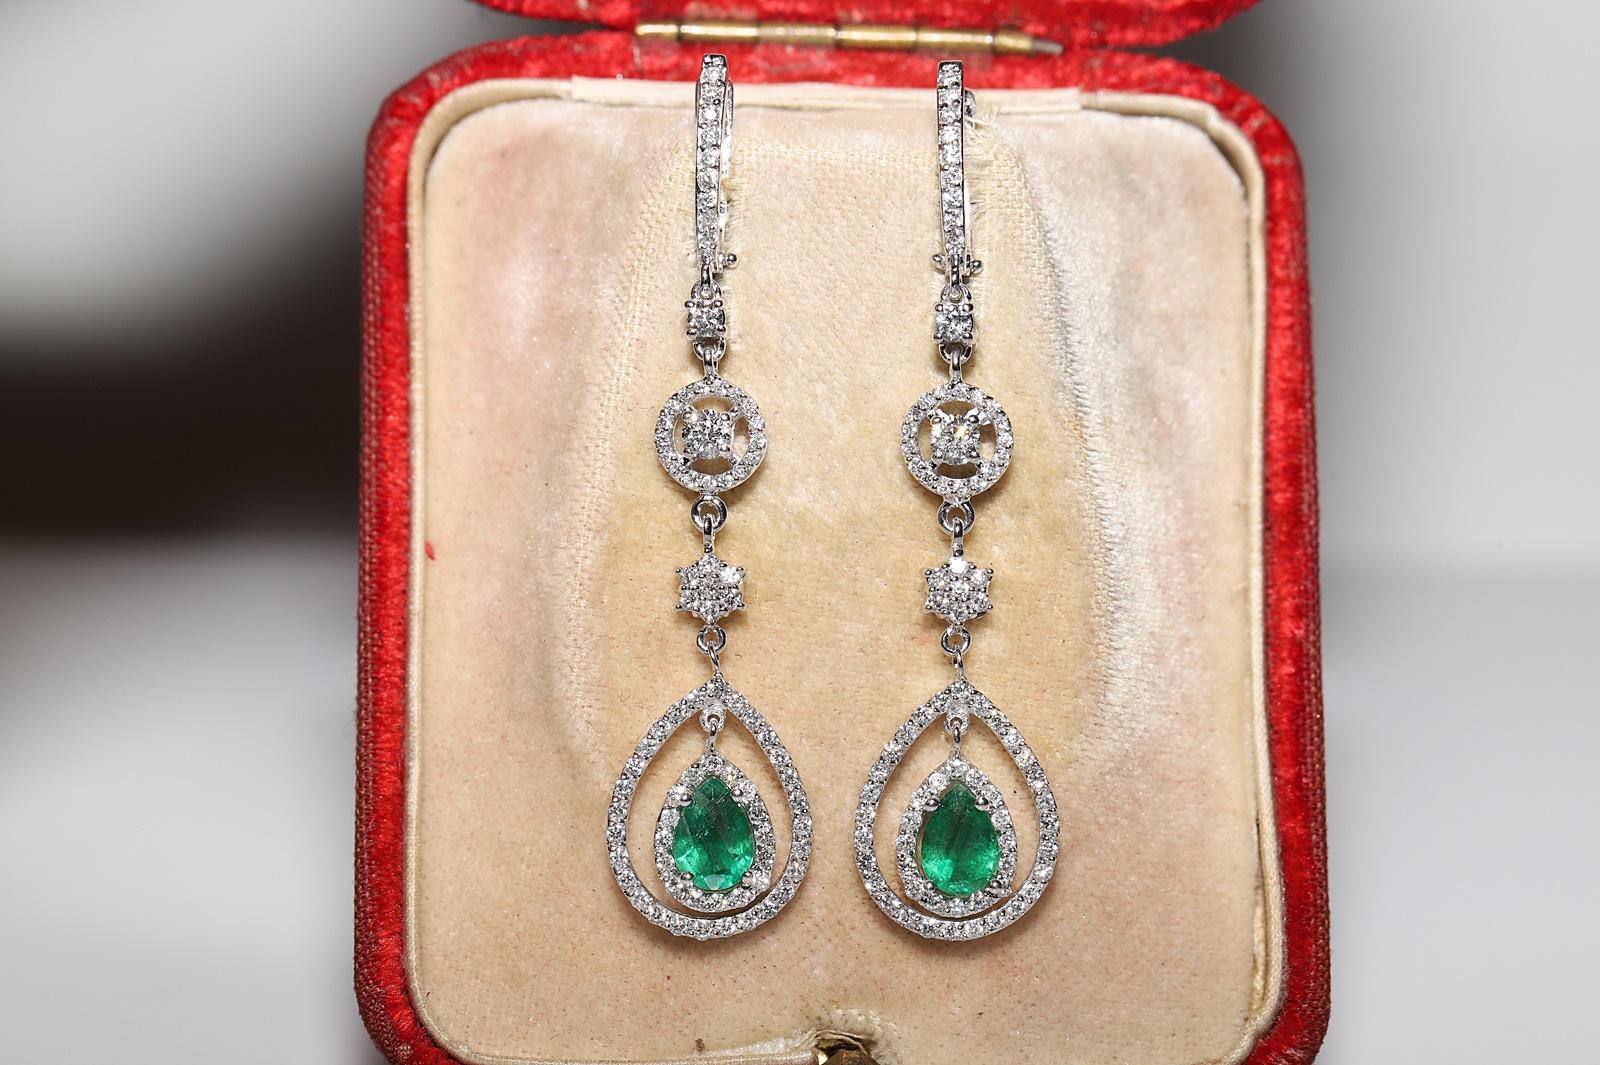 In very good condition.
Total weight is 7.6 grams.
Totally is diamond about 1.80 ct.
The diamond is has G-H color and vs-s1-s2 clarity.
Totally is emerald 1.60 ct.
Acid tested to be 18k real gold.
Box is not included.
Please contact for any